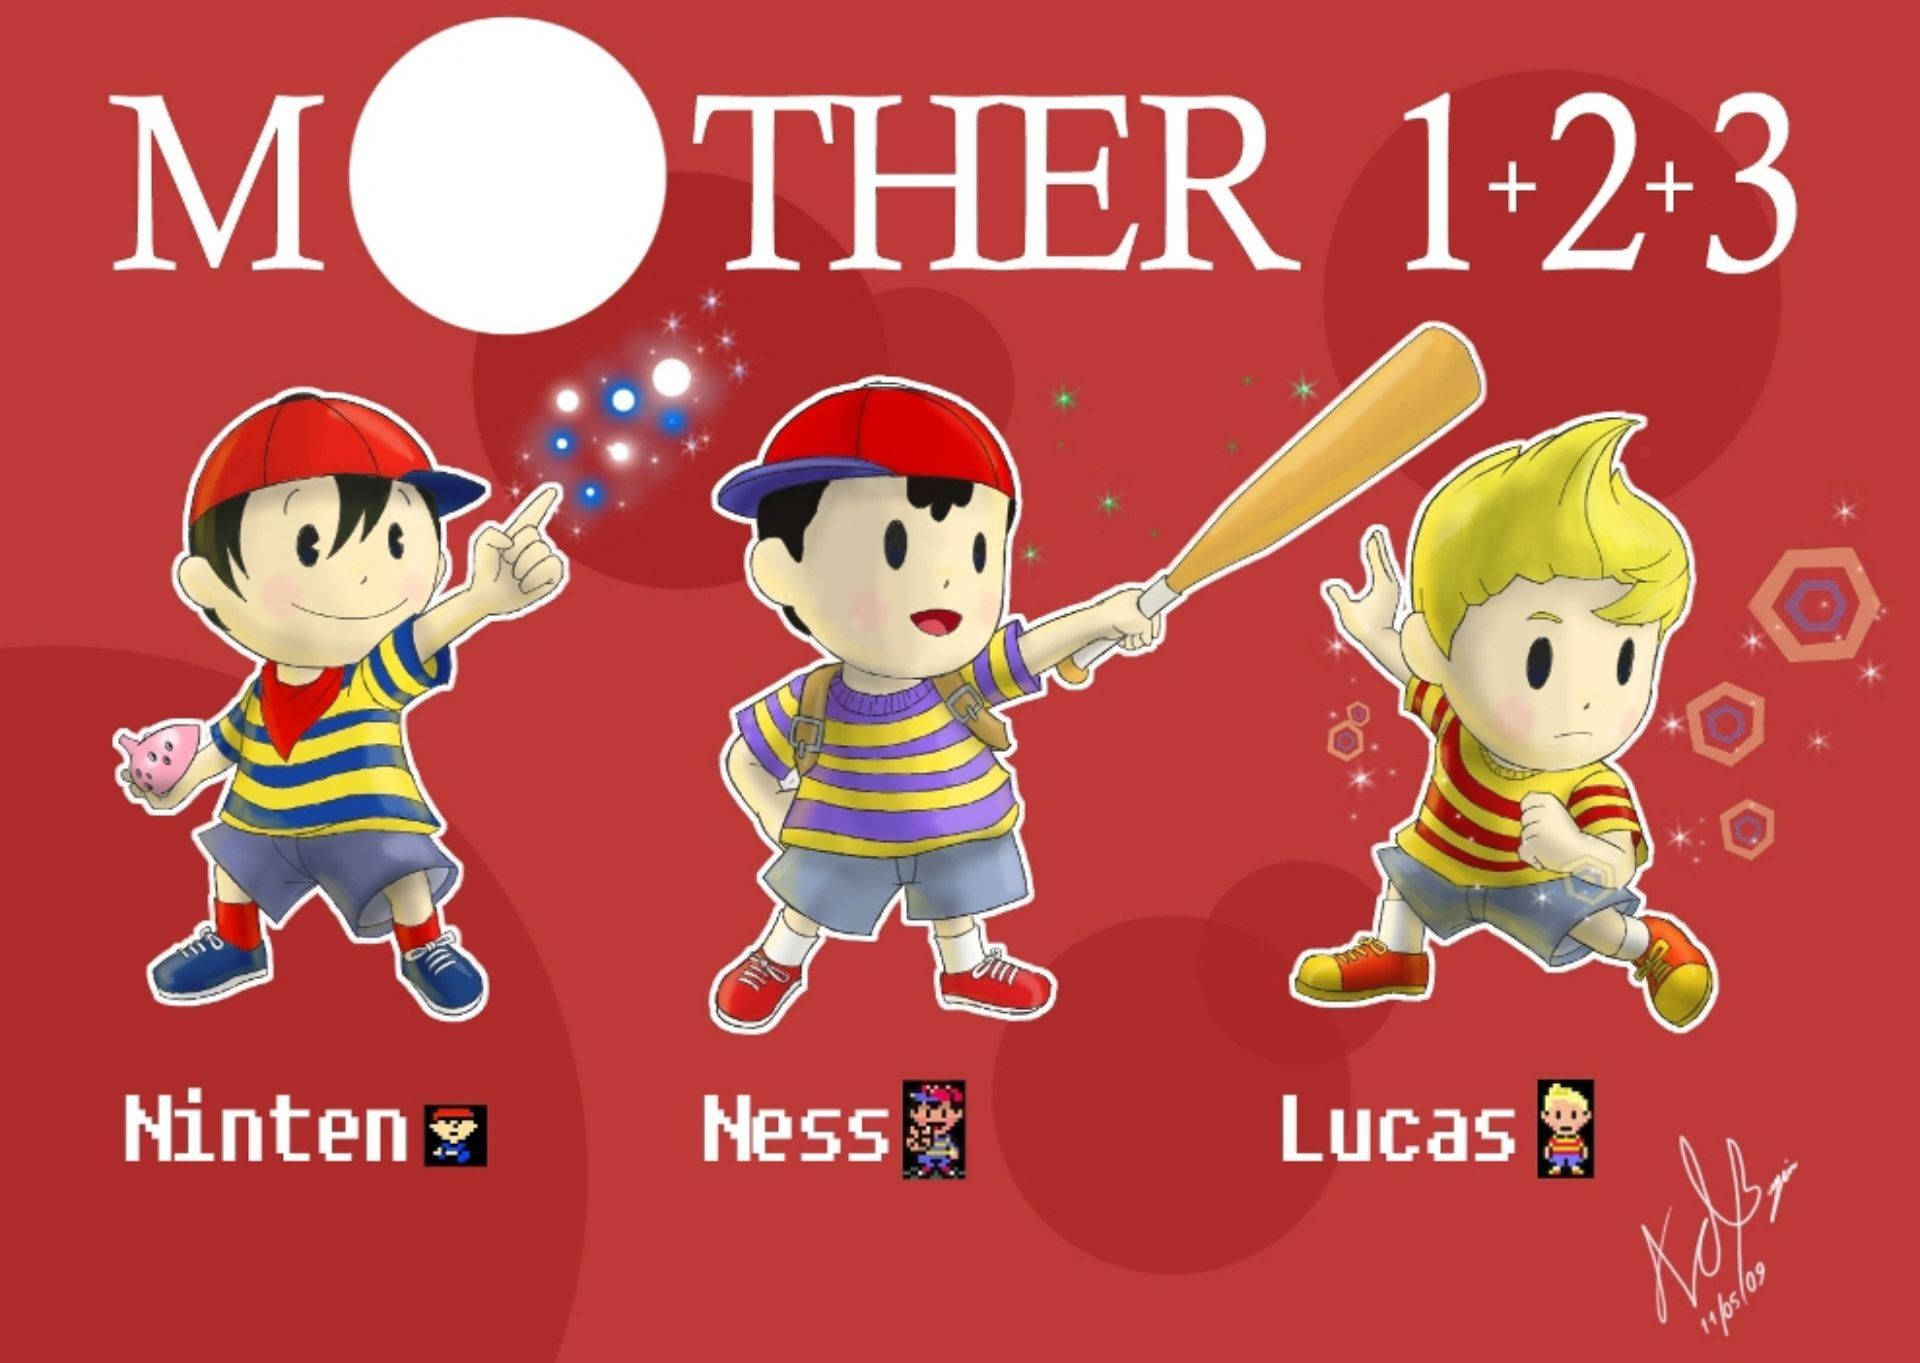 "Explore Your Inner Psyche - Experience Earthbound!" Wallpaper